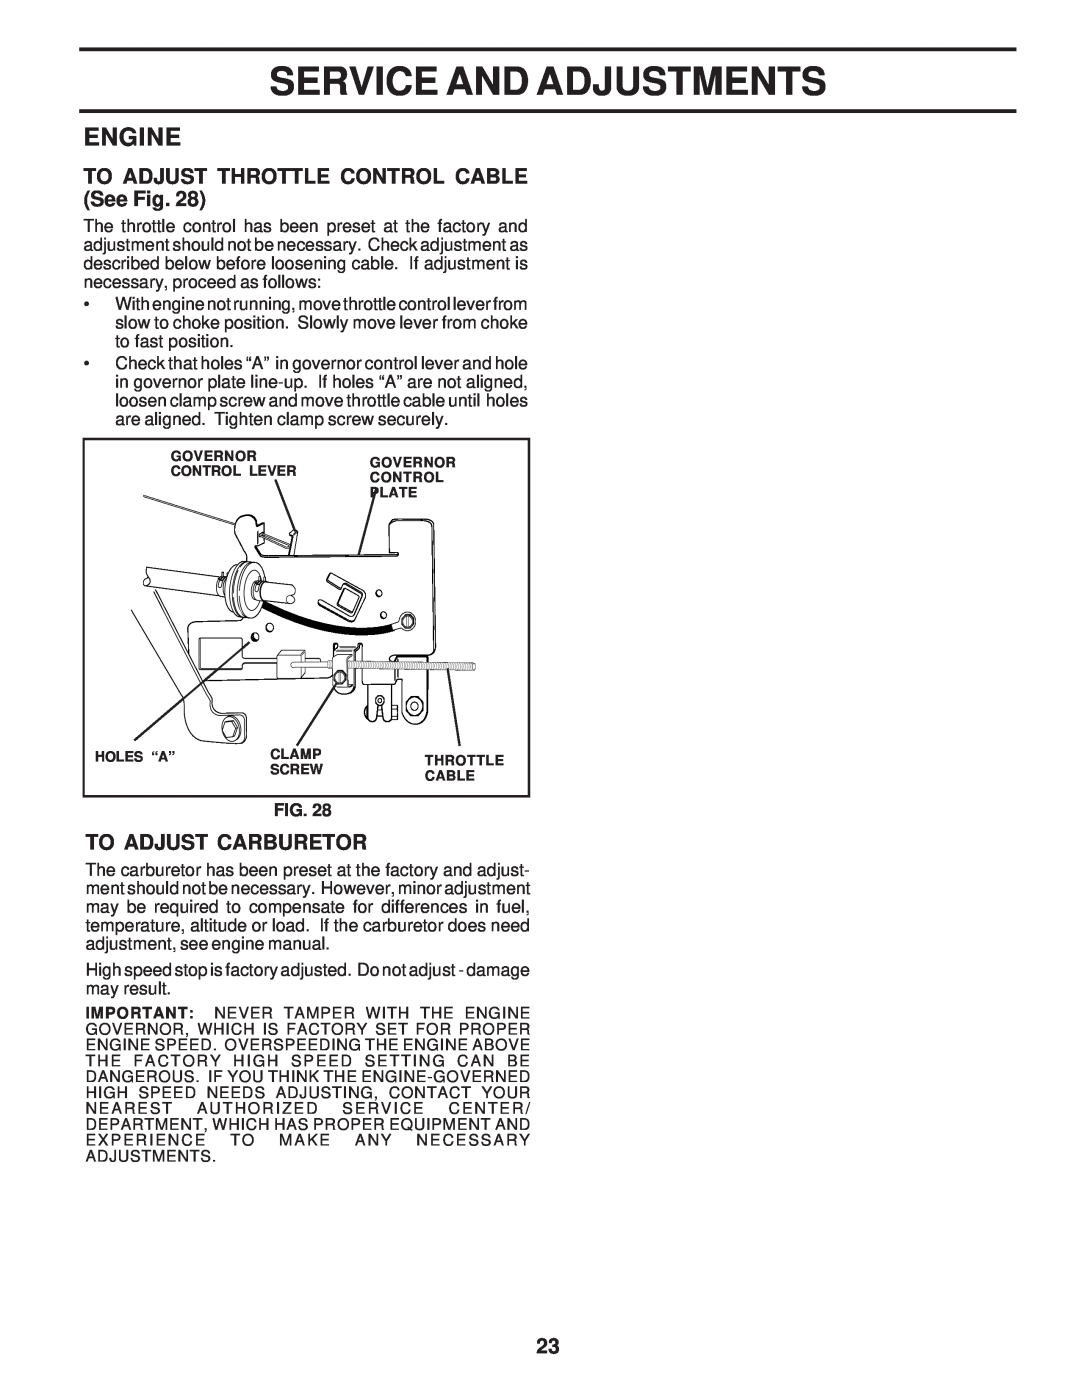 Weed Eater 174193 TO ADJUST THROTTLE CONTROL CABLE See Fig, To Adjust Carburetor, Service And Adjustments, Engine 